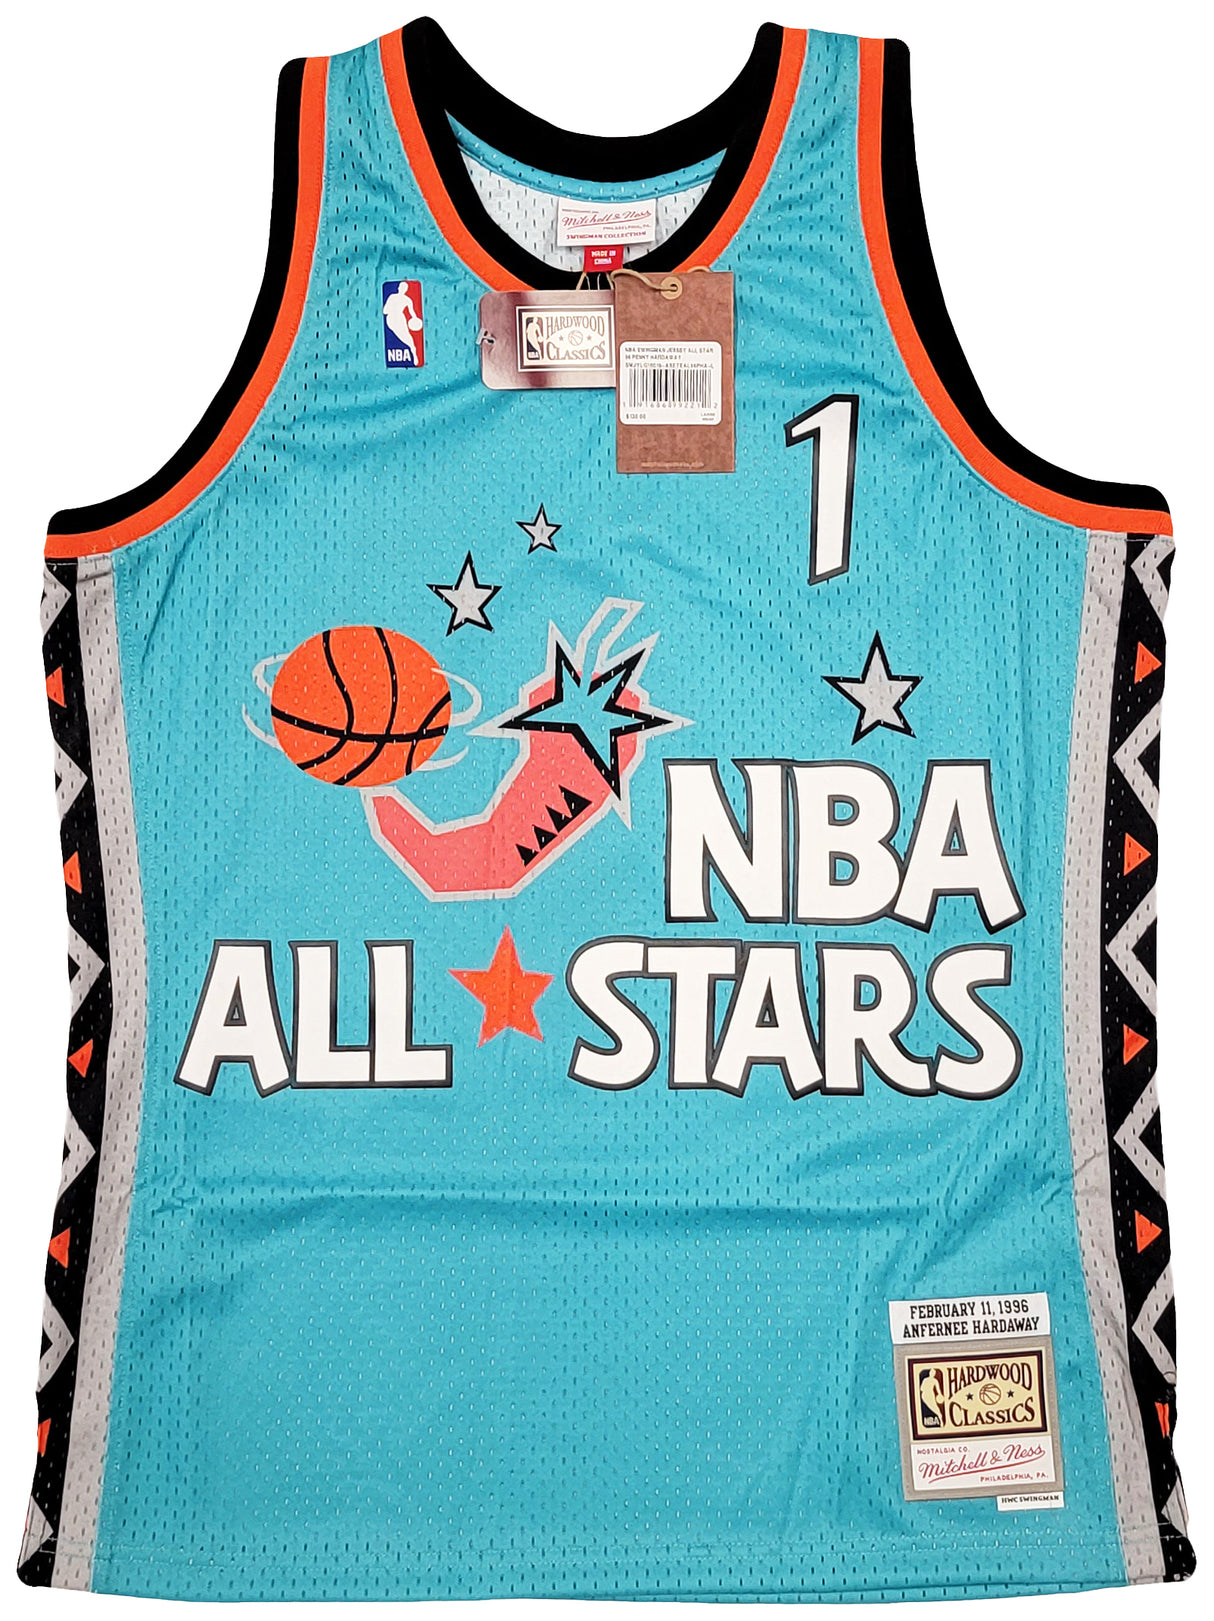 Orlando Magic Anfernee Penny Hardaway Autographed Teal Authentic Mitchell & Ness All Star Game Feb 11,1996 Hardwood Classic Swingman Jersey Size L PSA/DNA Stock #208257